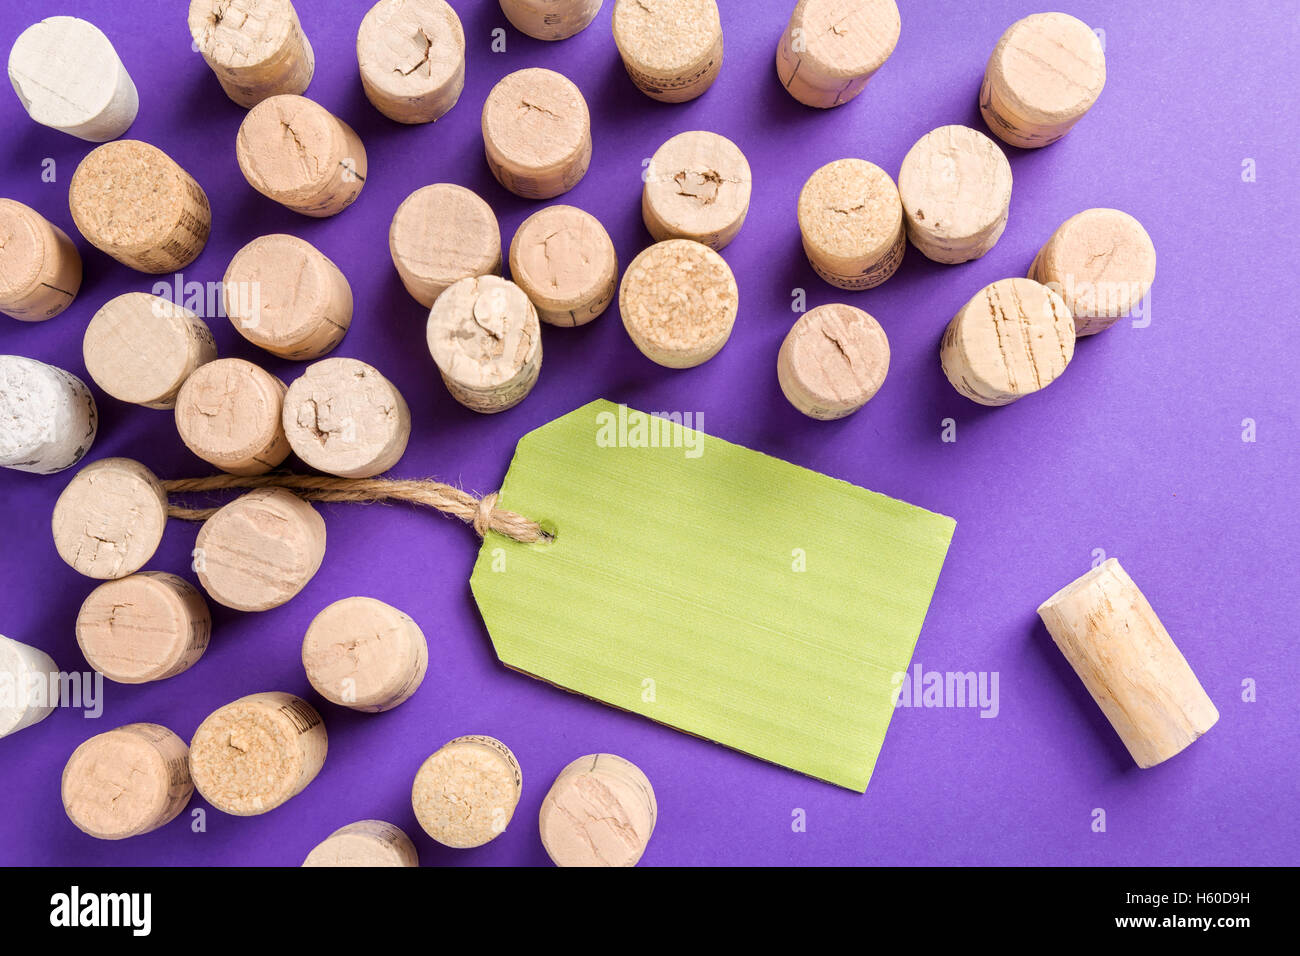 Wine cork stoppers with green label on purple background Stock Photo